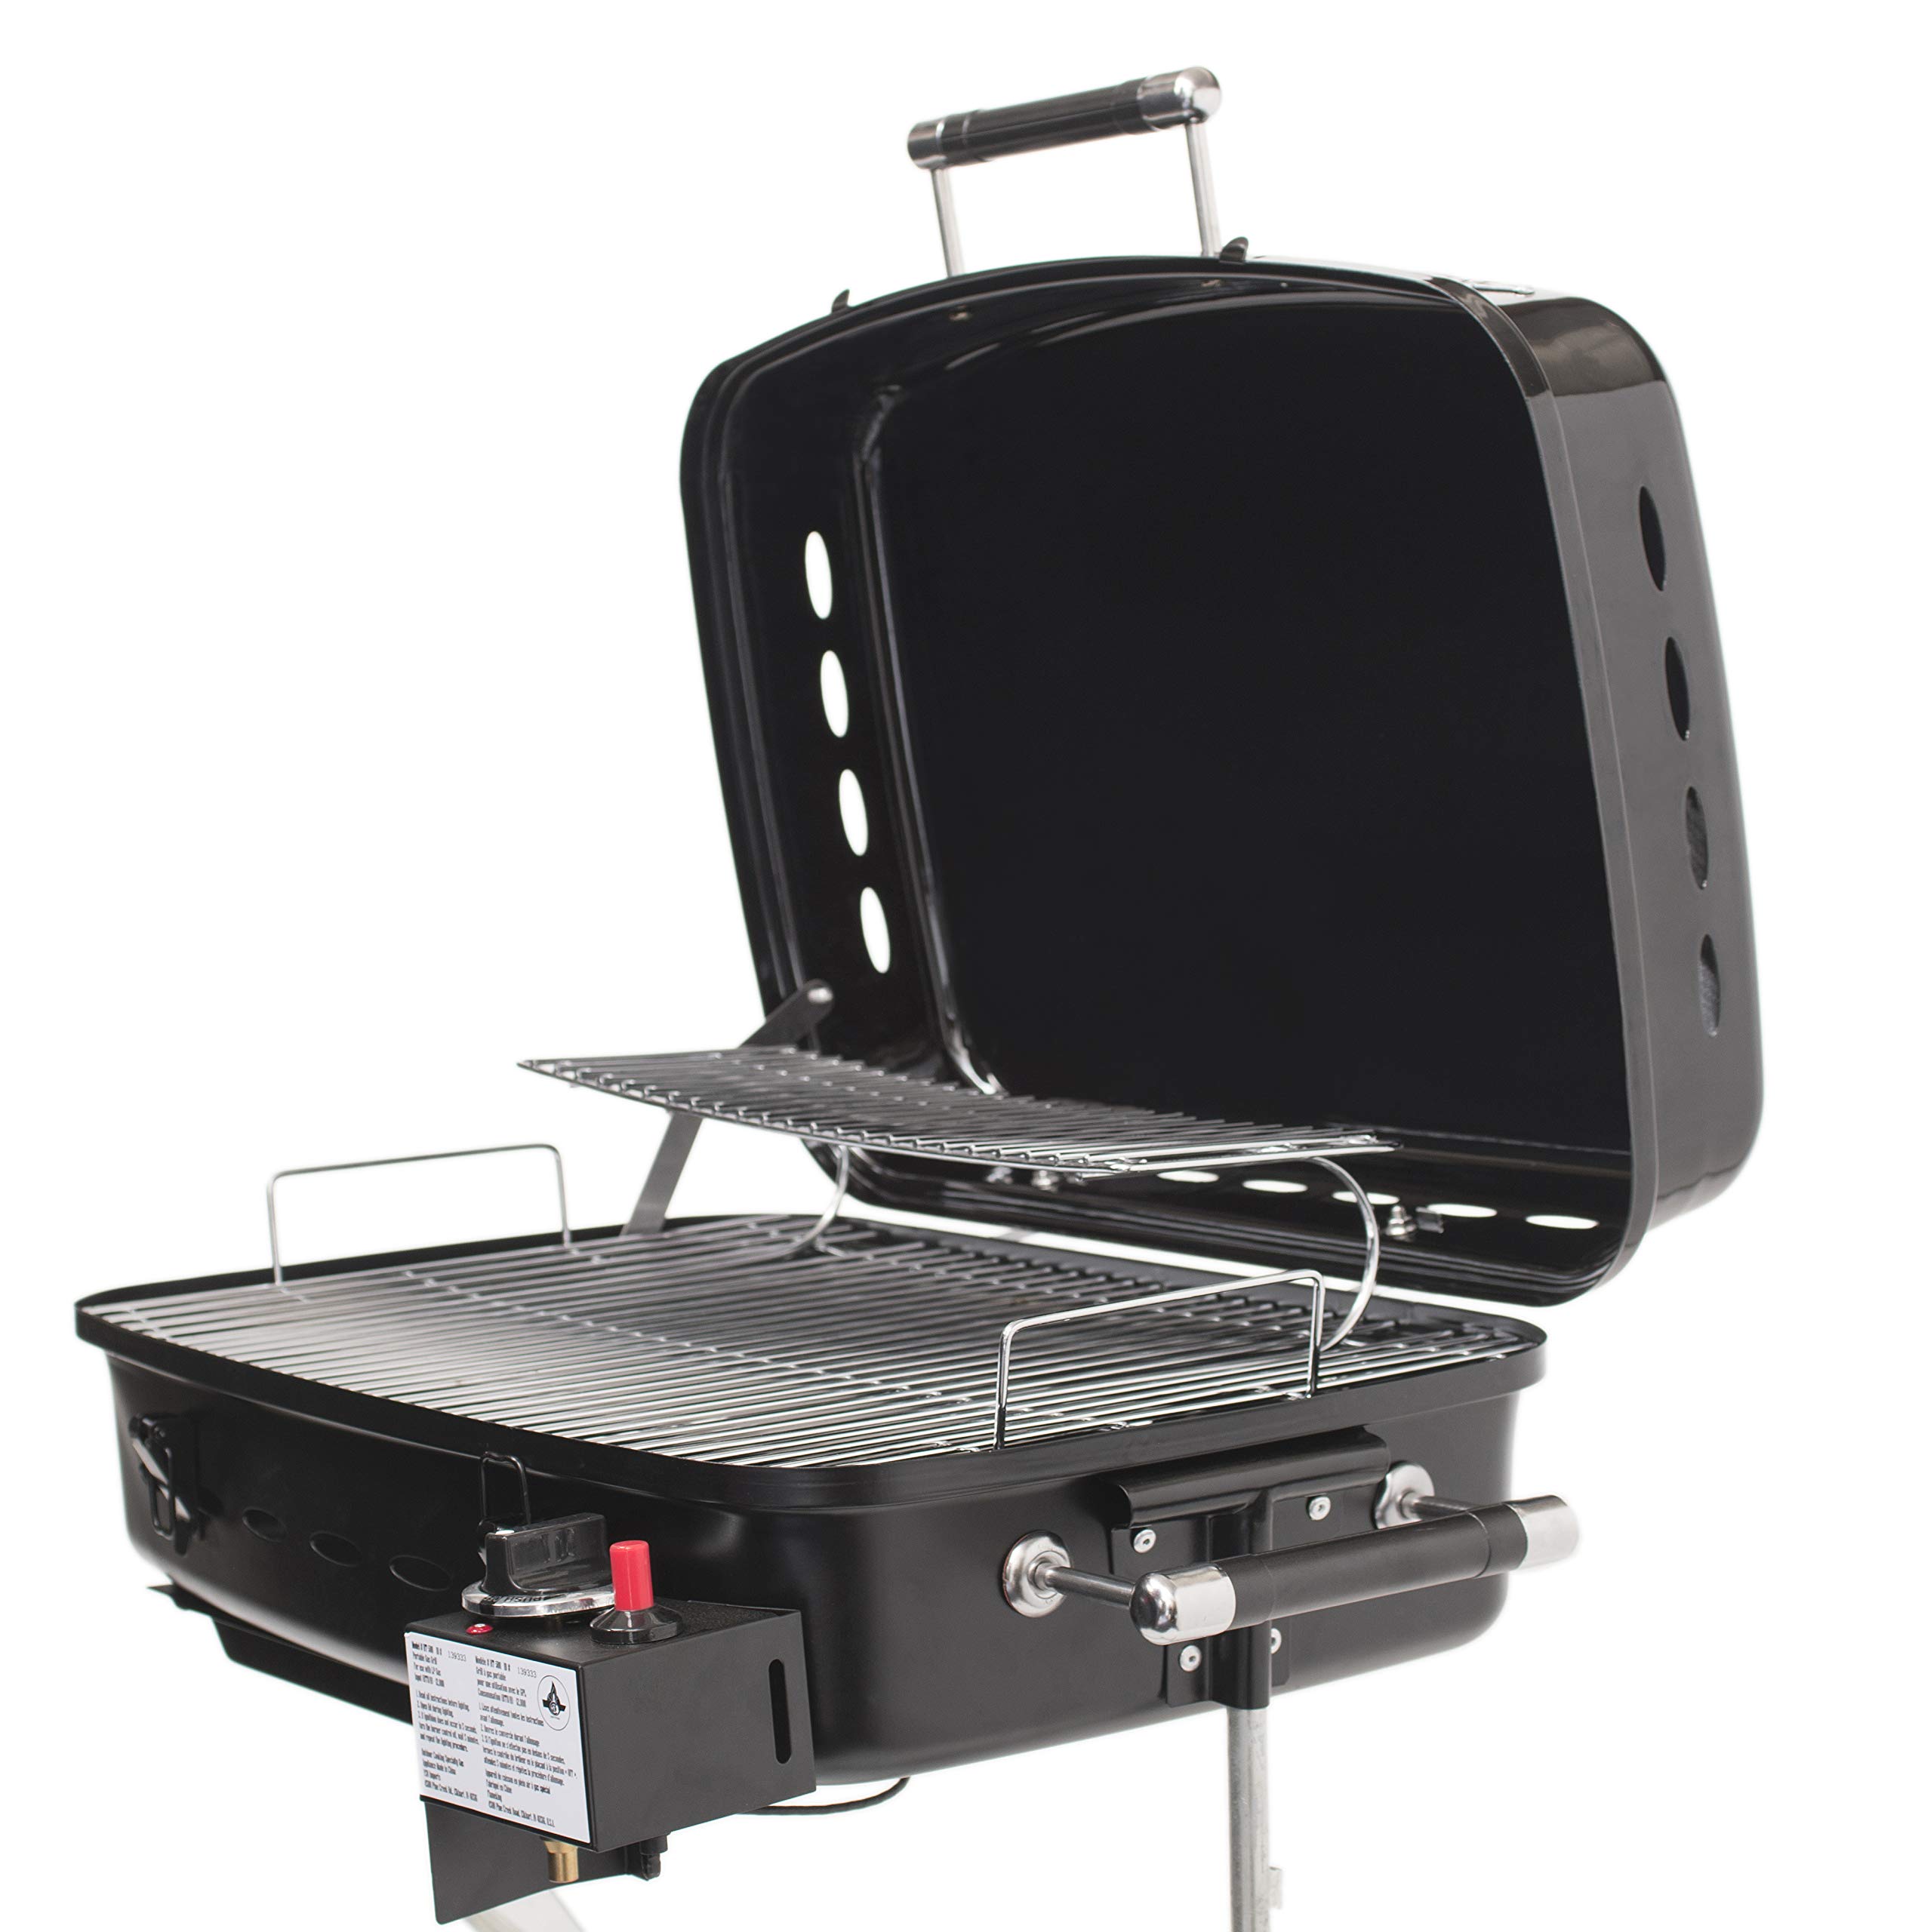 RV OR TRAILER MOUNTED GRILL W/CARRY BAG BLACK